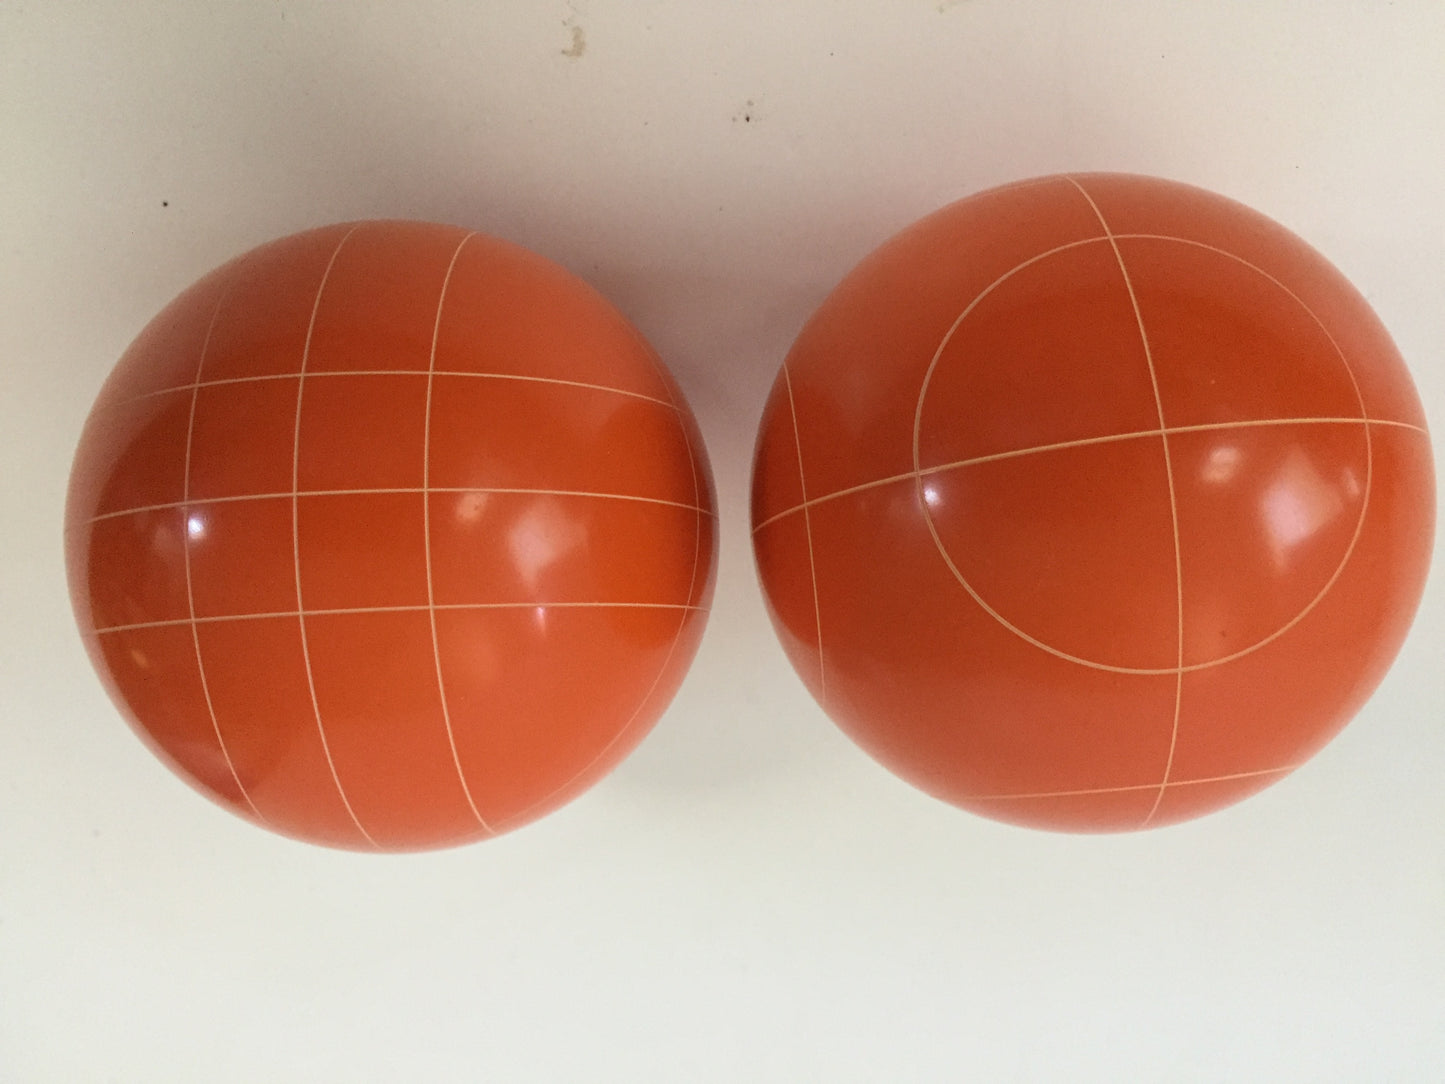 Pack of 2 - Replacement Bocce Balls - 107mm - Orange with 2 different scoring patterns